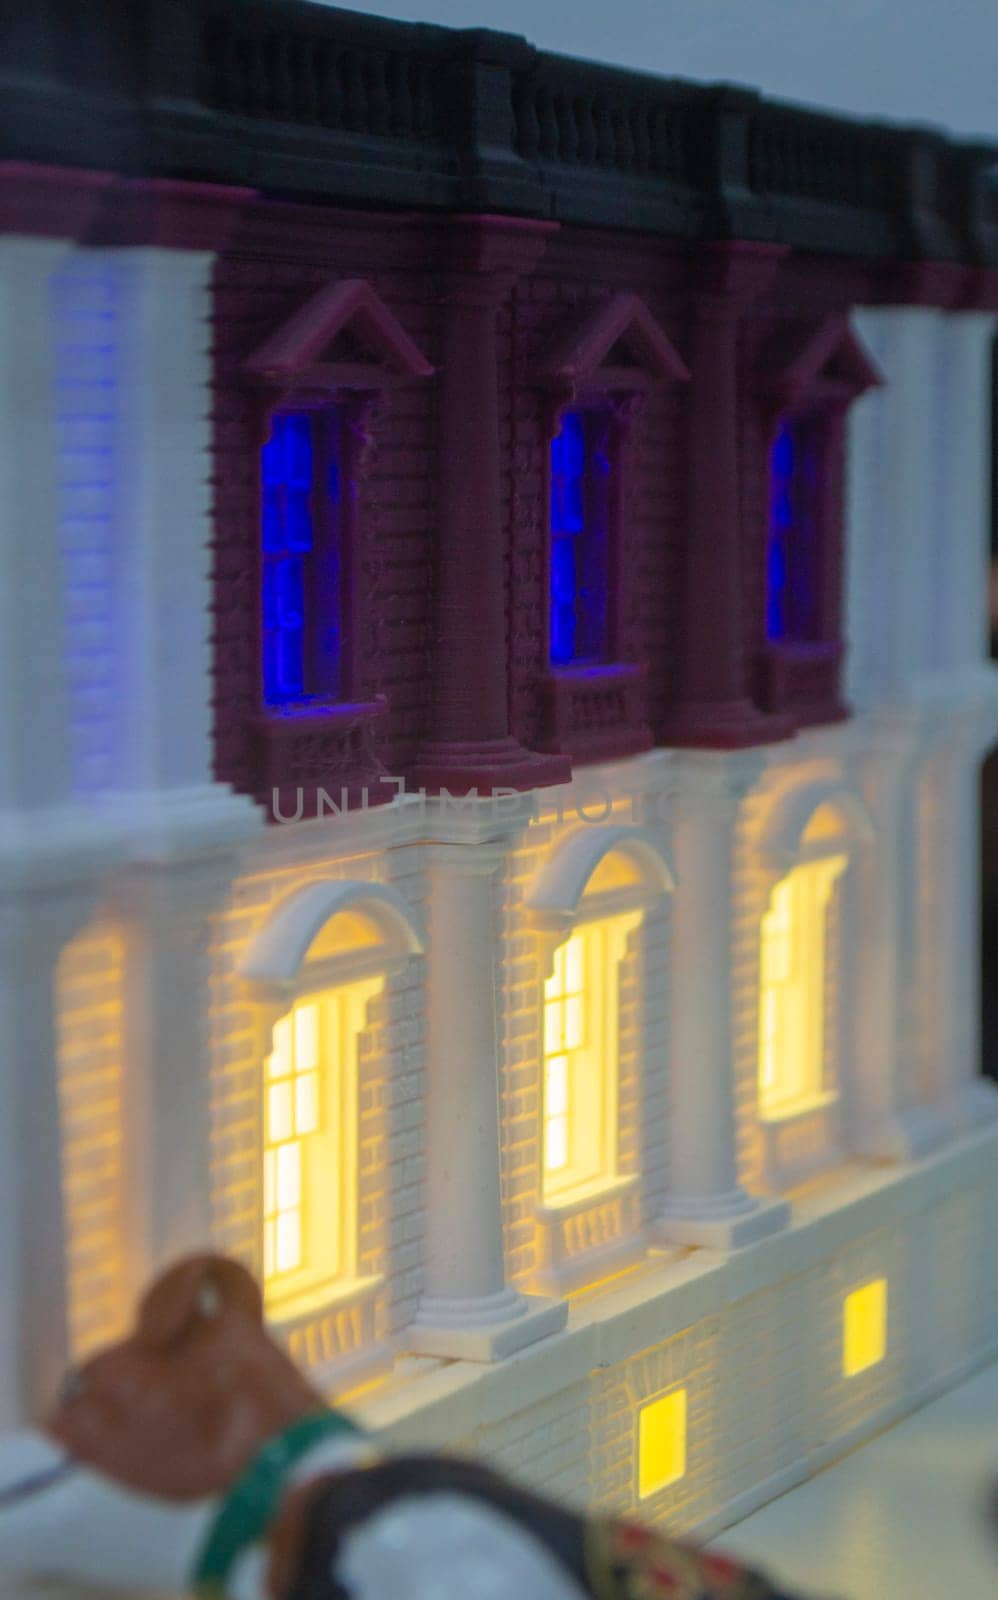 Prototype printed on 3D printer brick building with columns and glowing windows by Mari1408